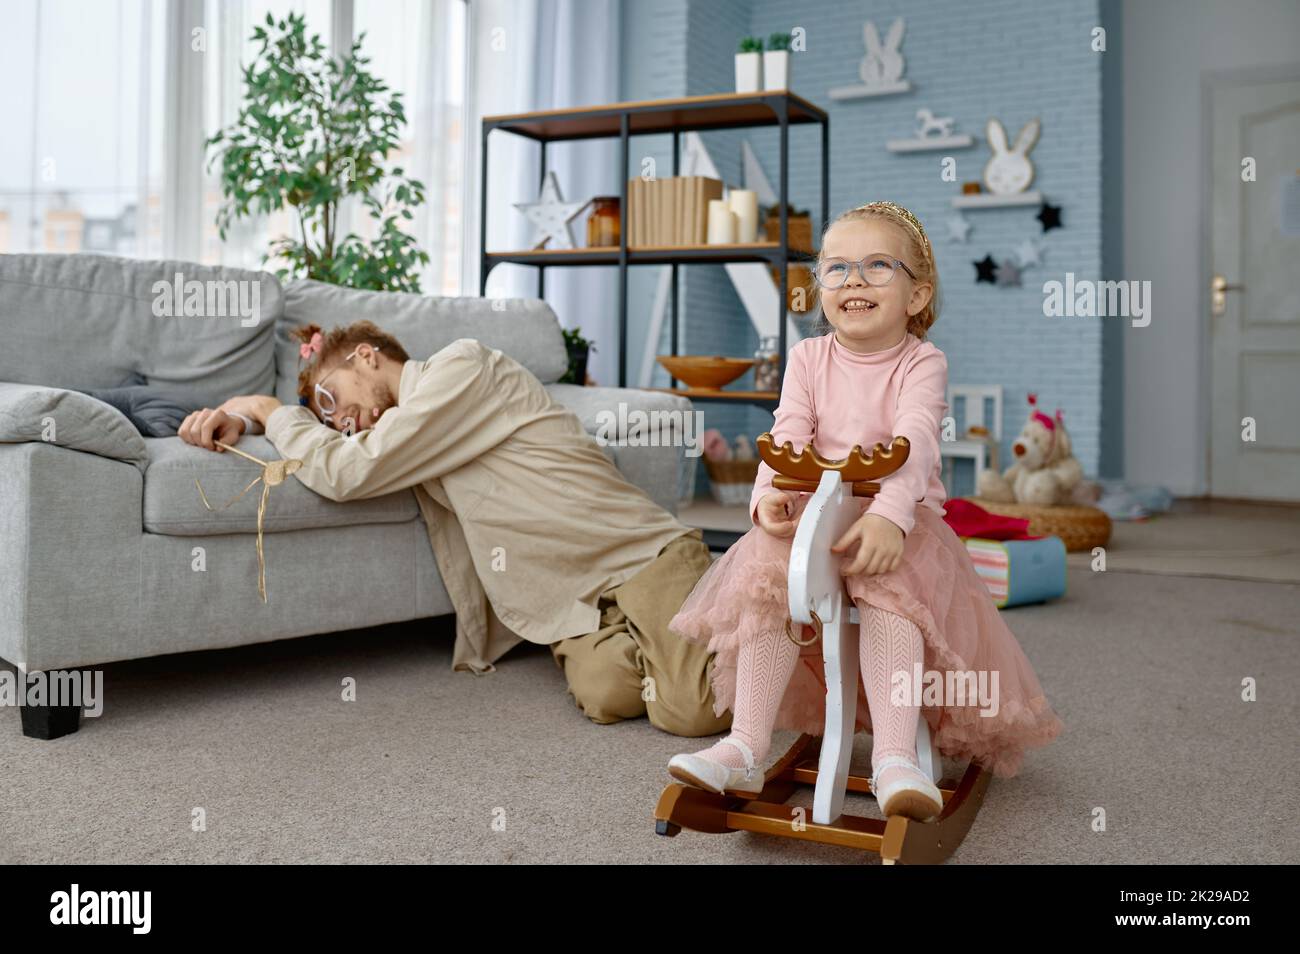 Tired fatigue father and naughty girl Stock Photo